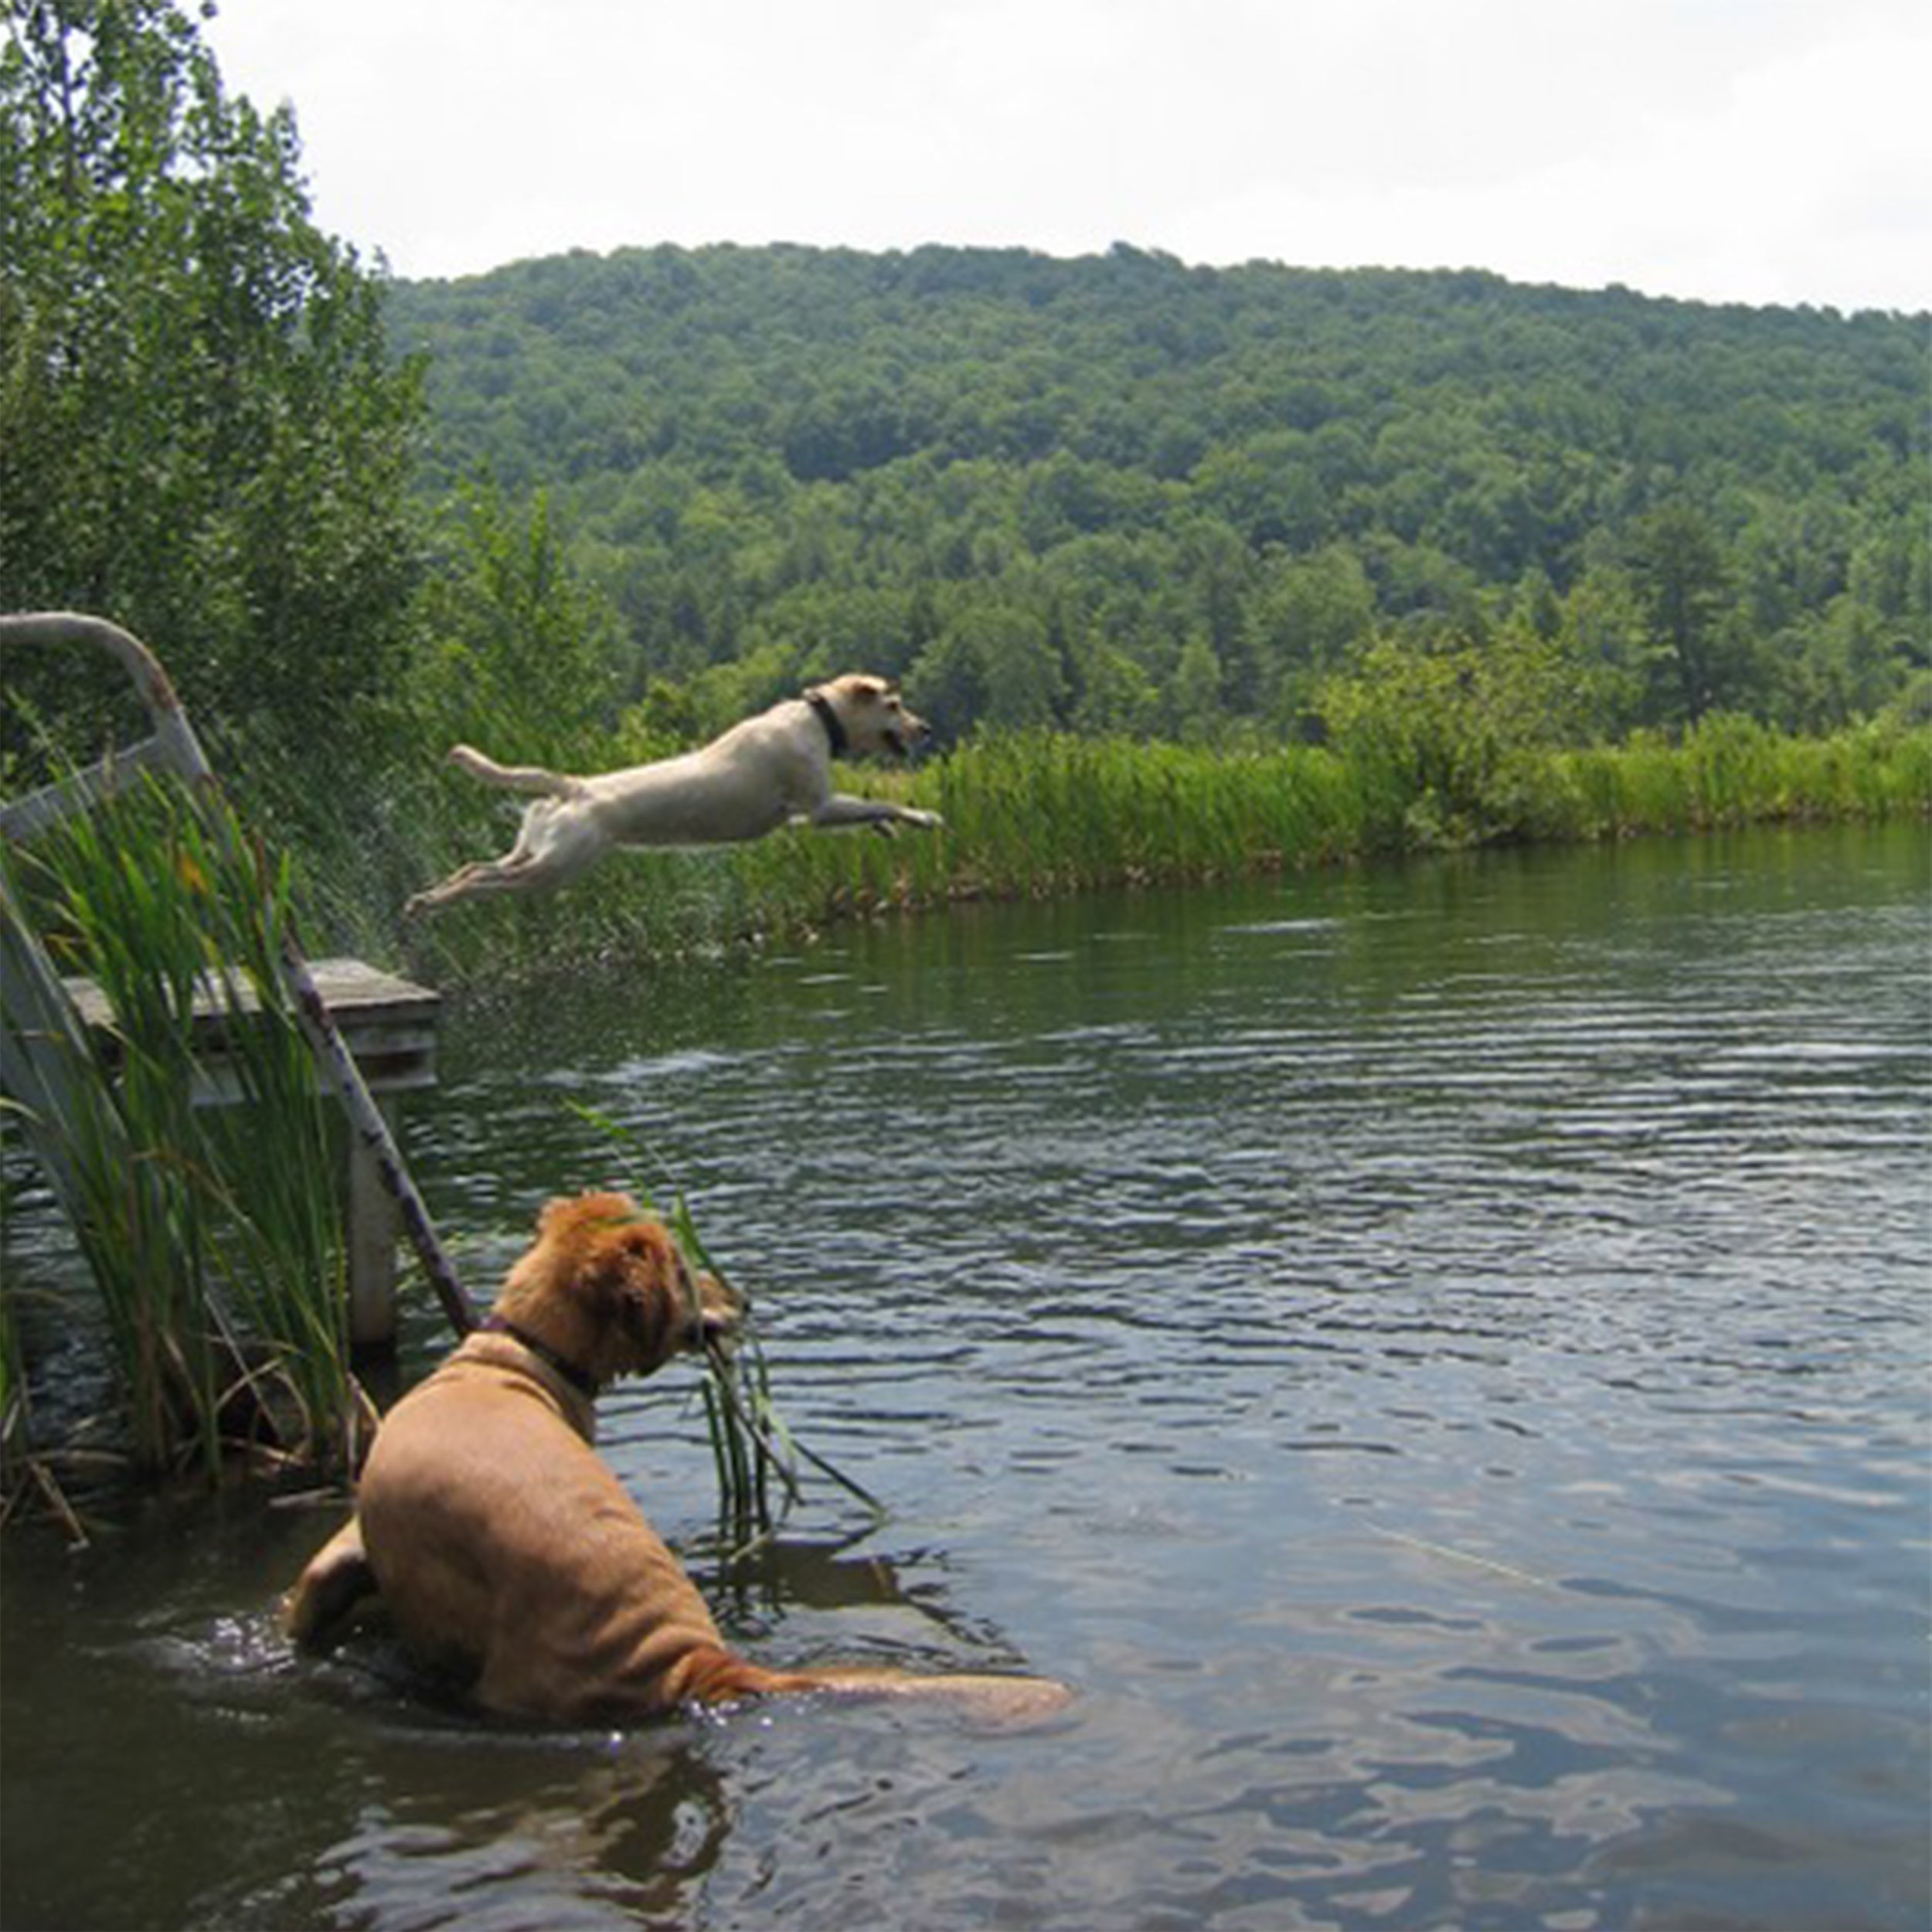 Above, Gromit watches the new addition to the family, Zoe, launch off a dock in upstate New York.